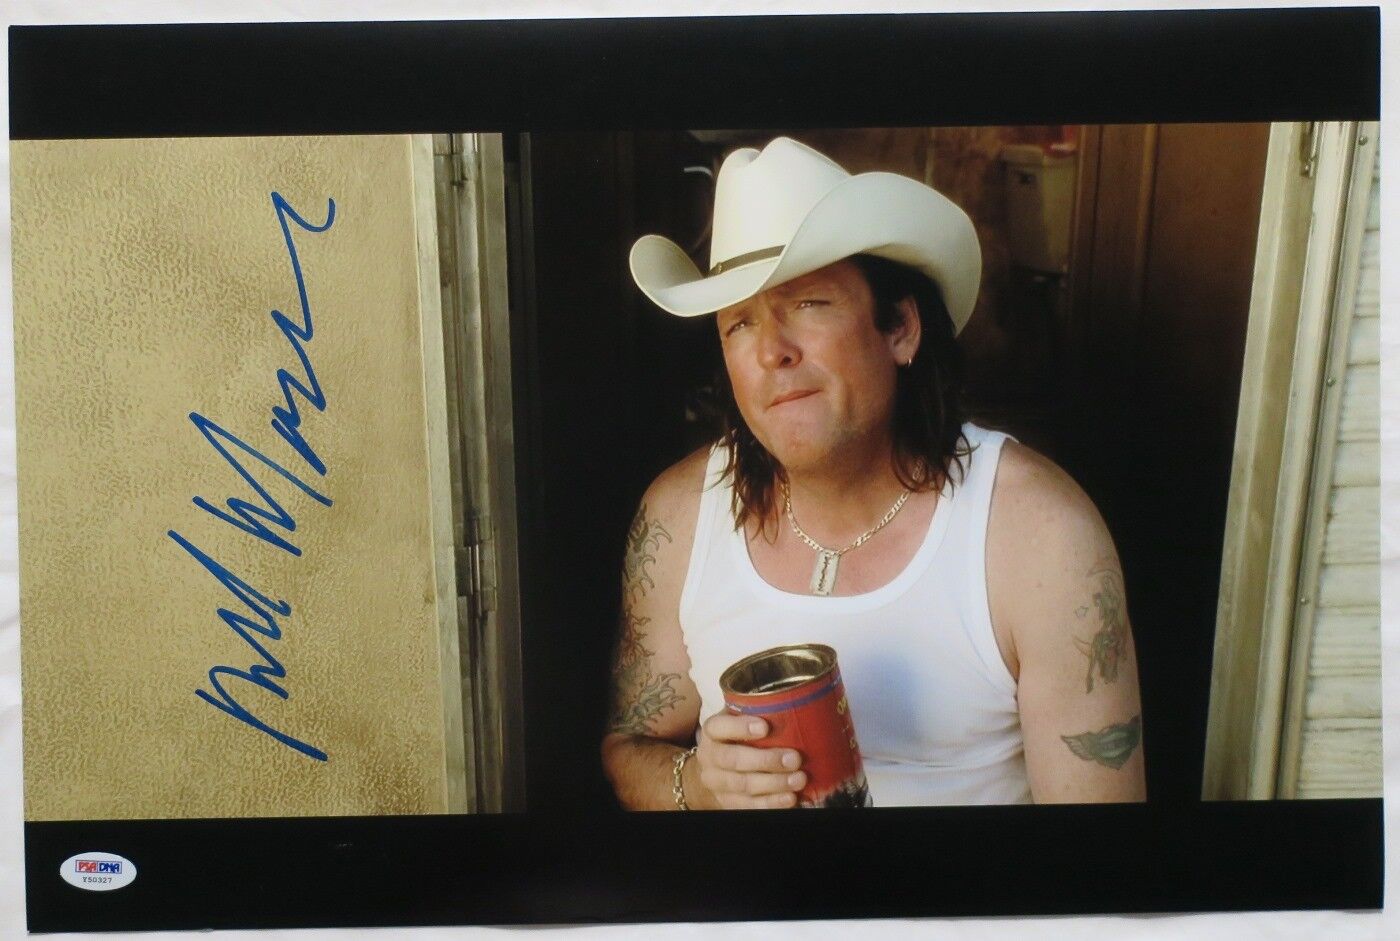 Michael Madsen Signed Kill Bill Authentic Autographed 12x18 Photo Poster painting PSA/DNA#Y50327